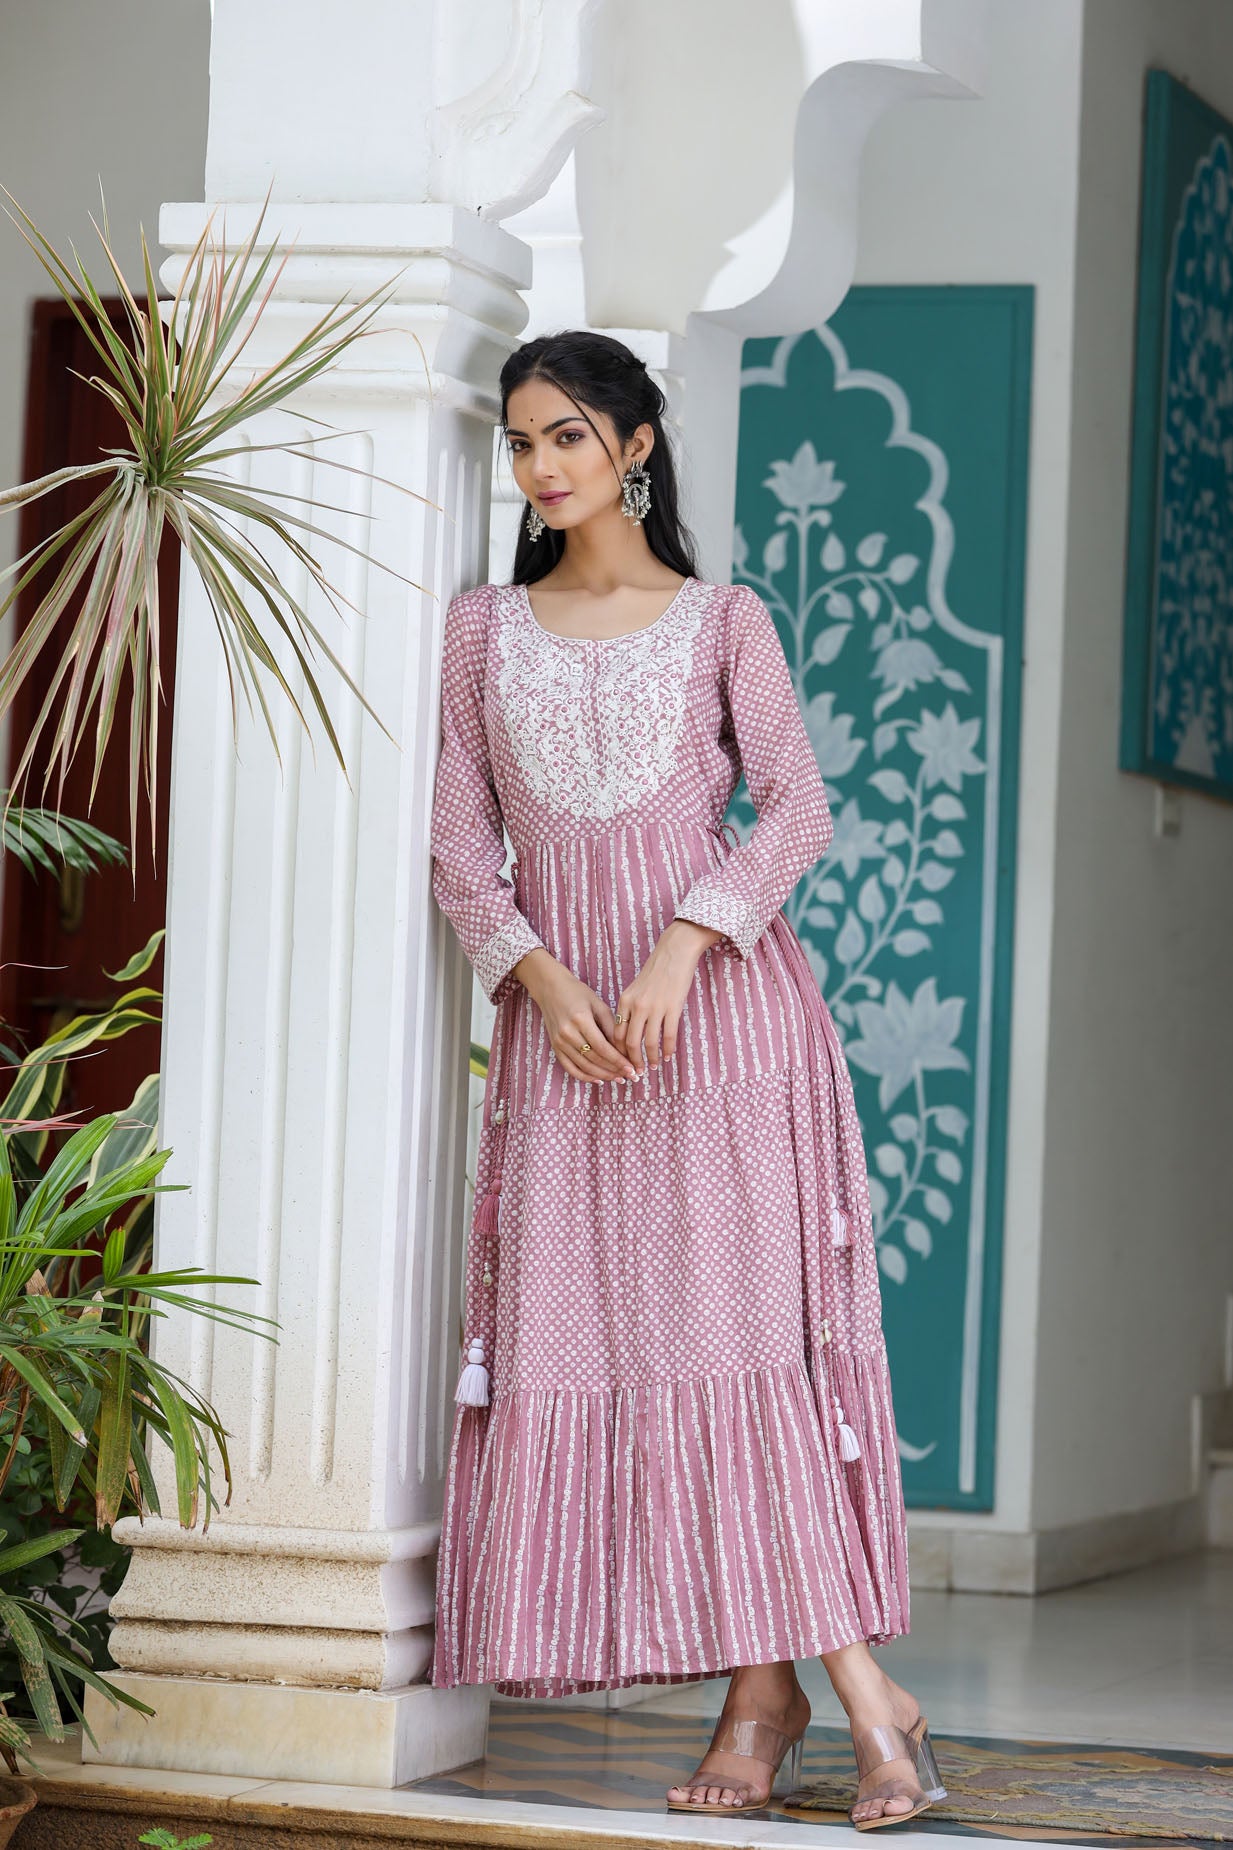 The Lavish Pink Long Gown